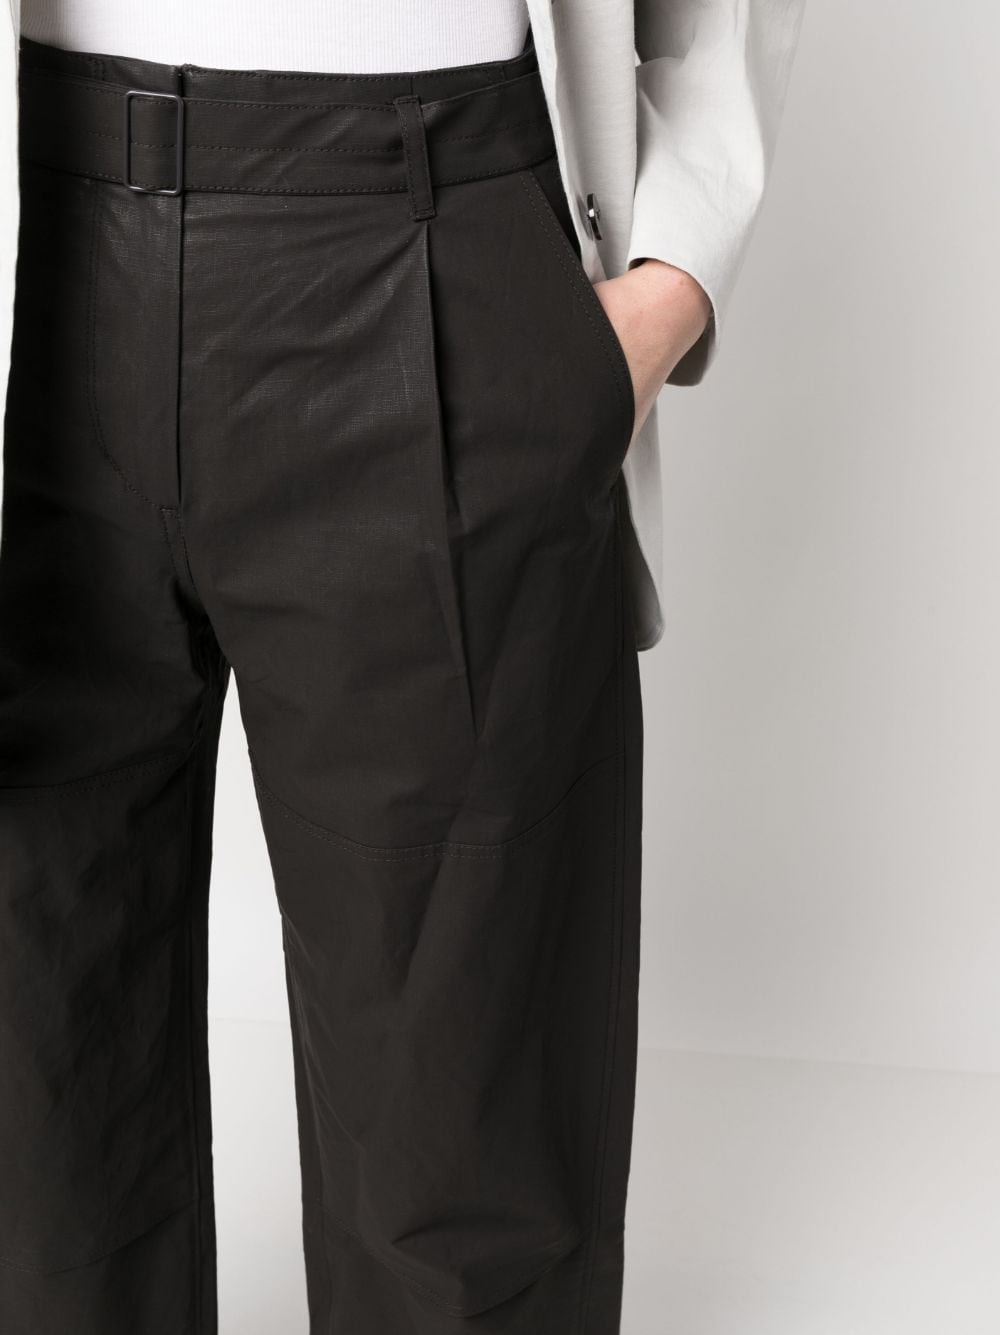 Low Classic Belted wide-leg Trousers - Farfetch